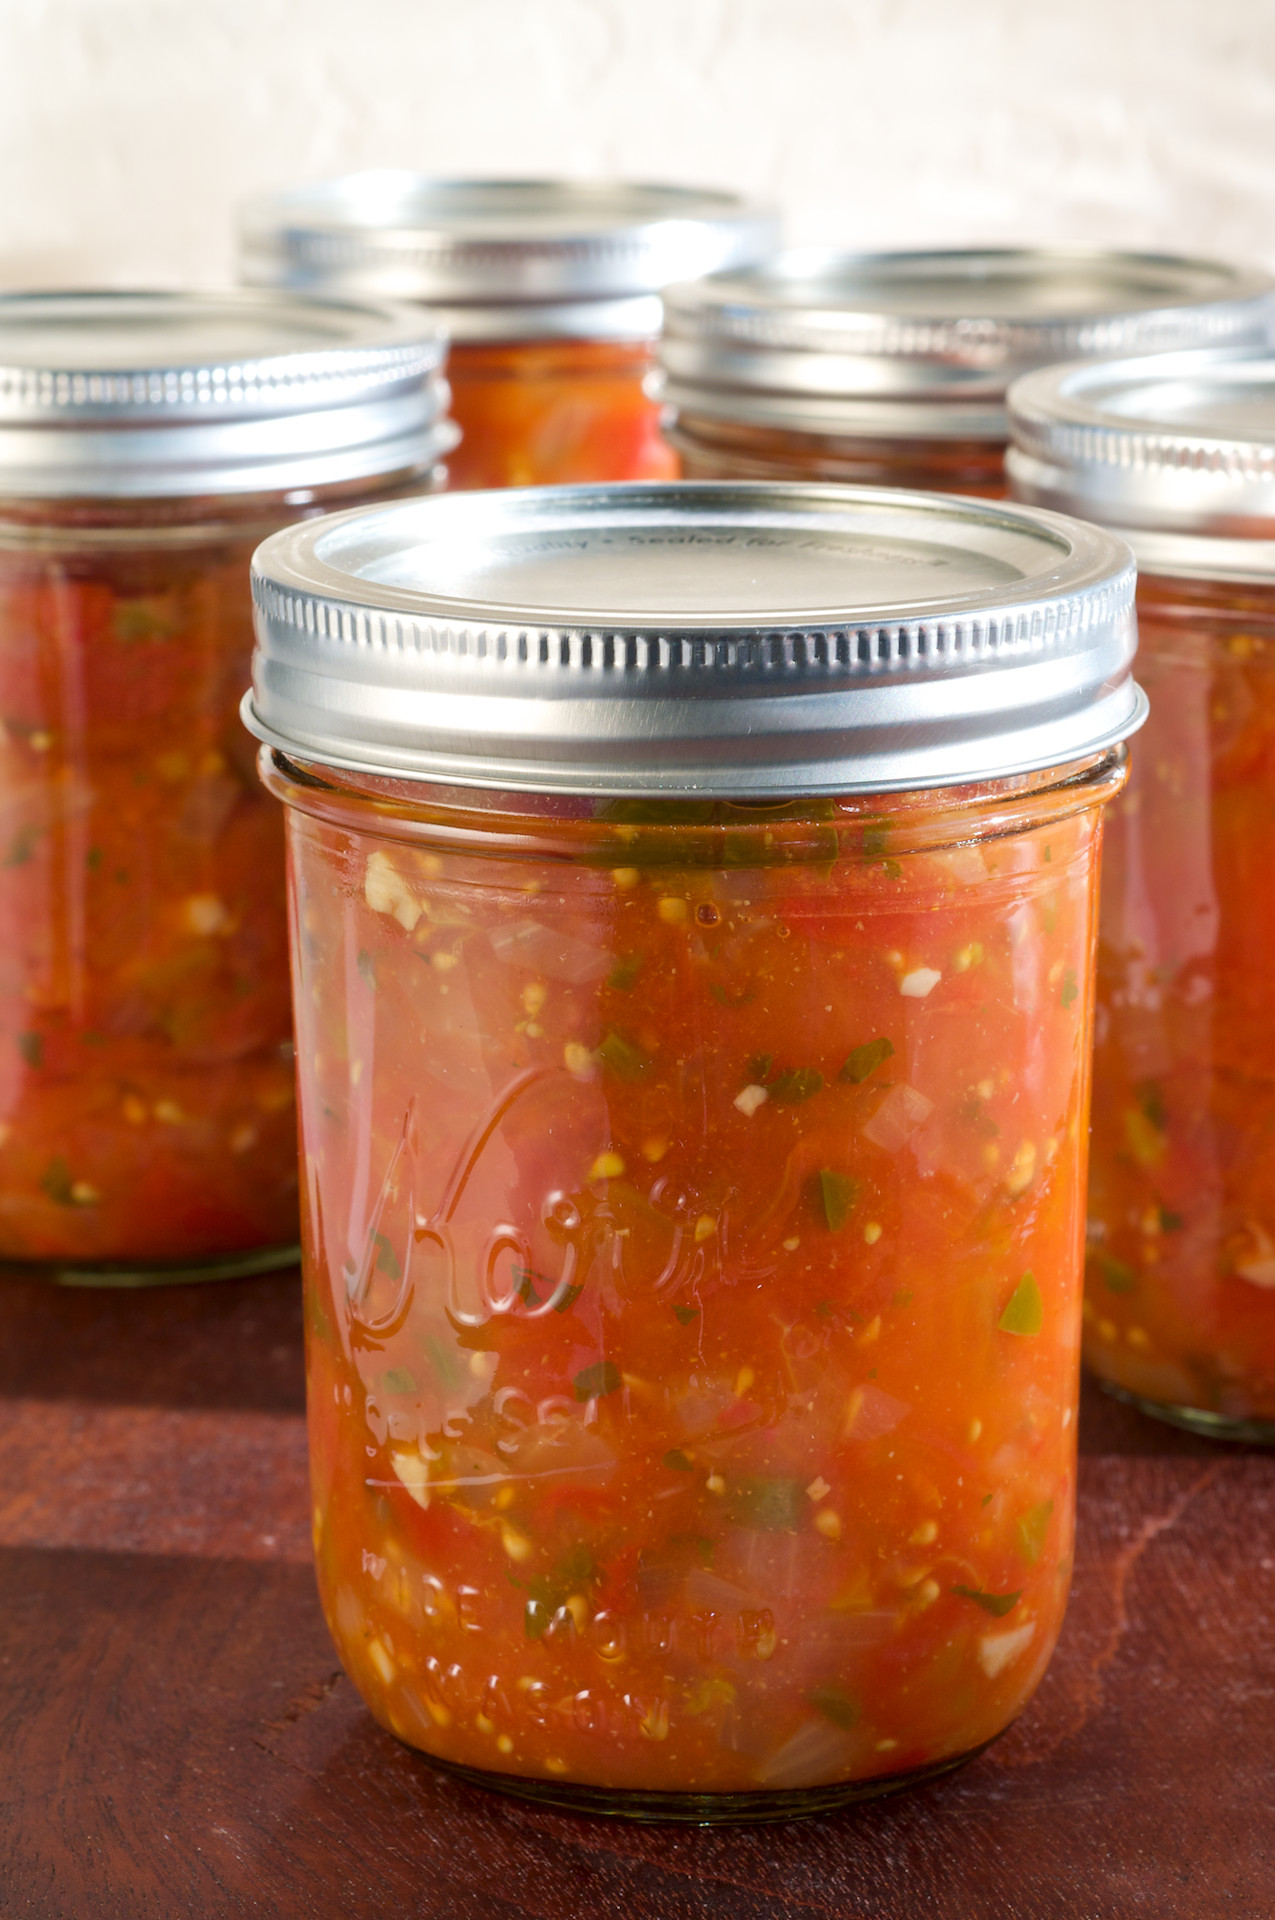 Hot Salsa Recipe For Canning
 Canning Homemade Salsa in Recipes on The Food Channel